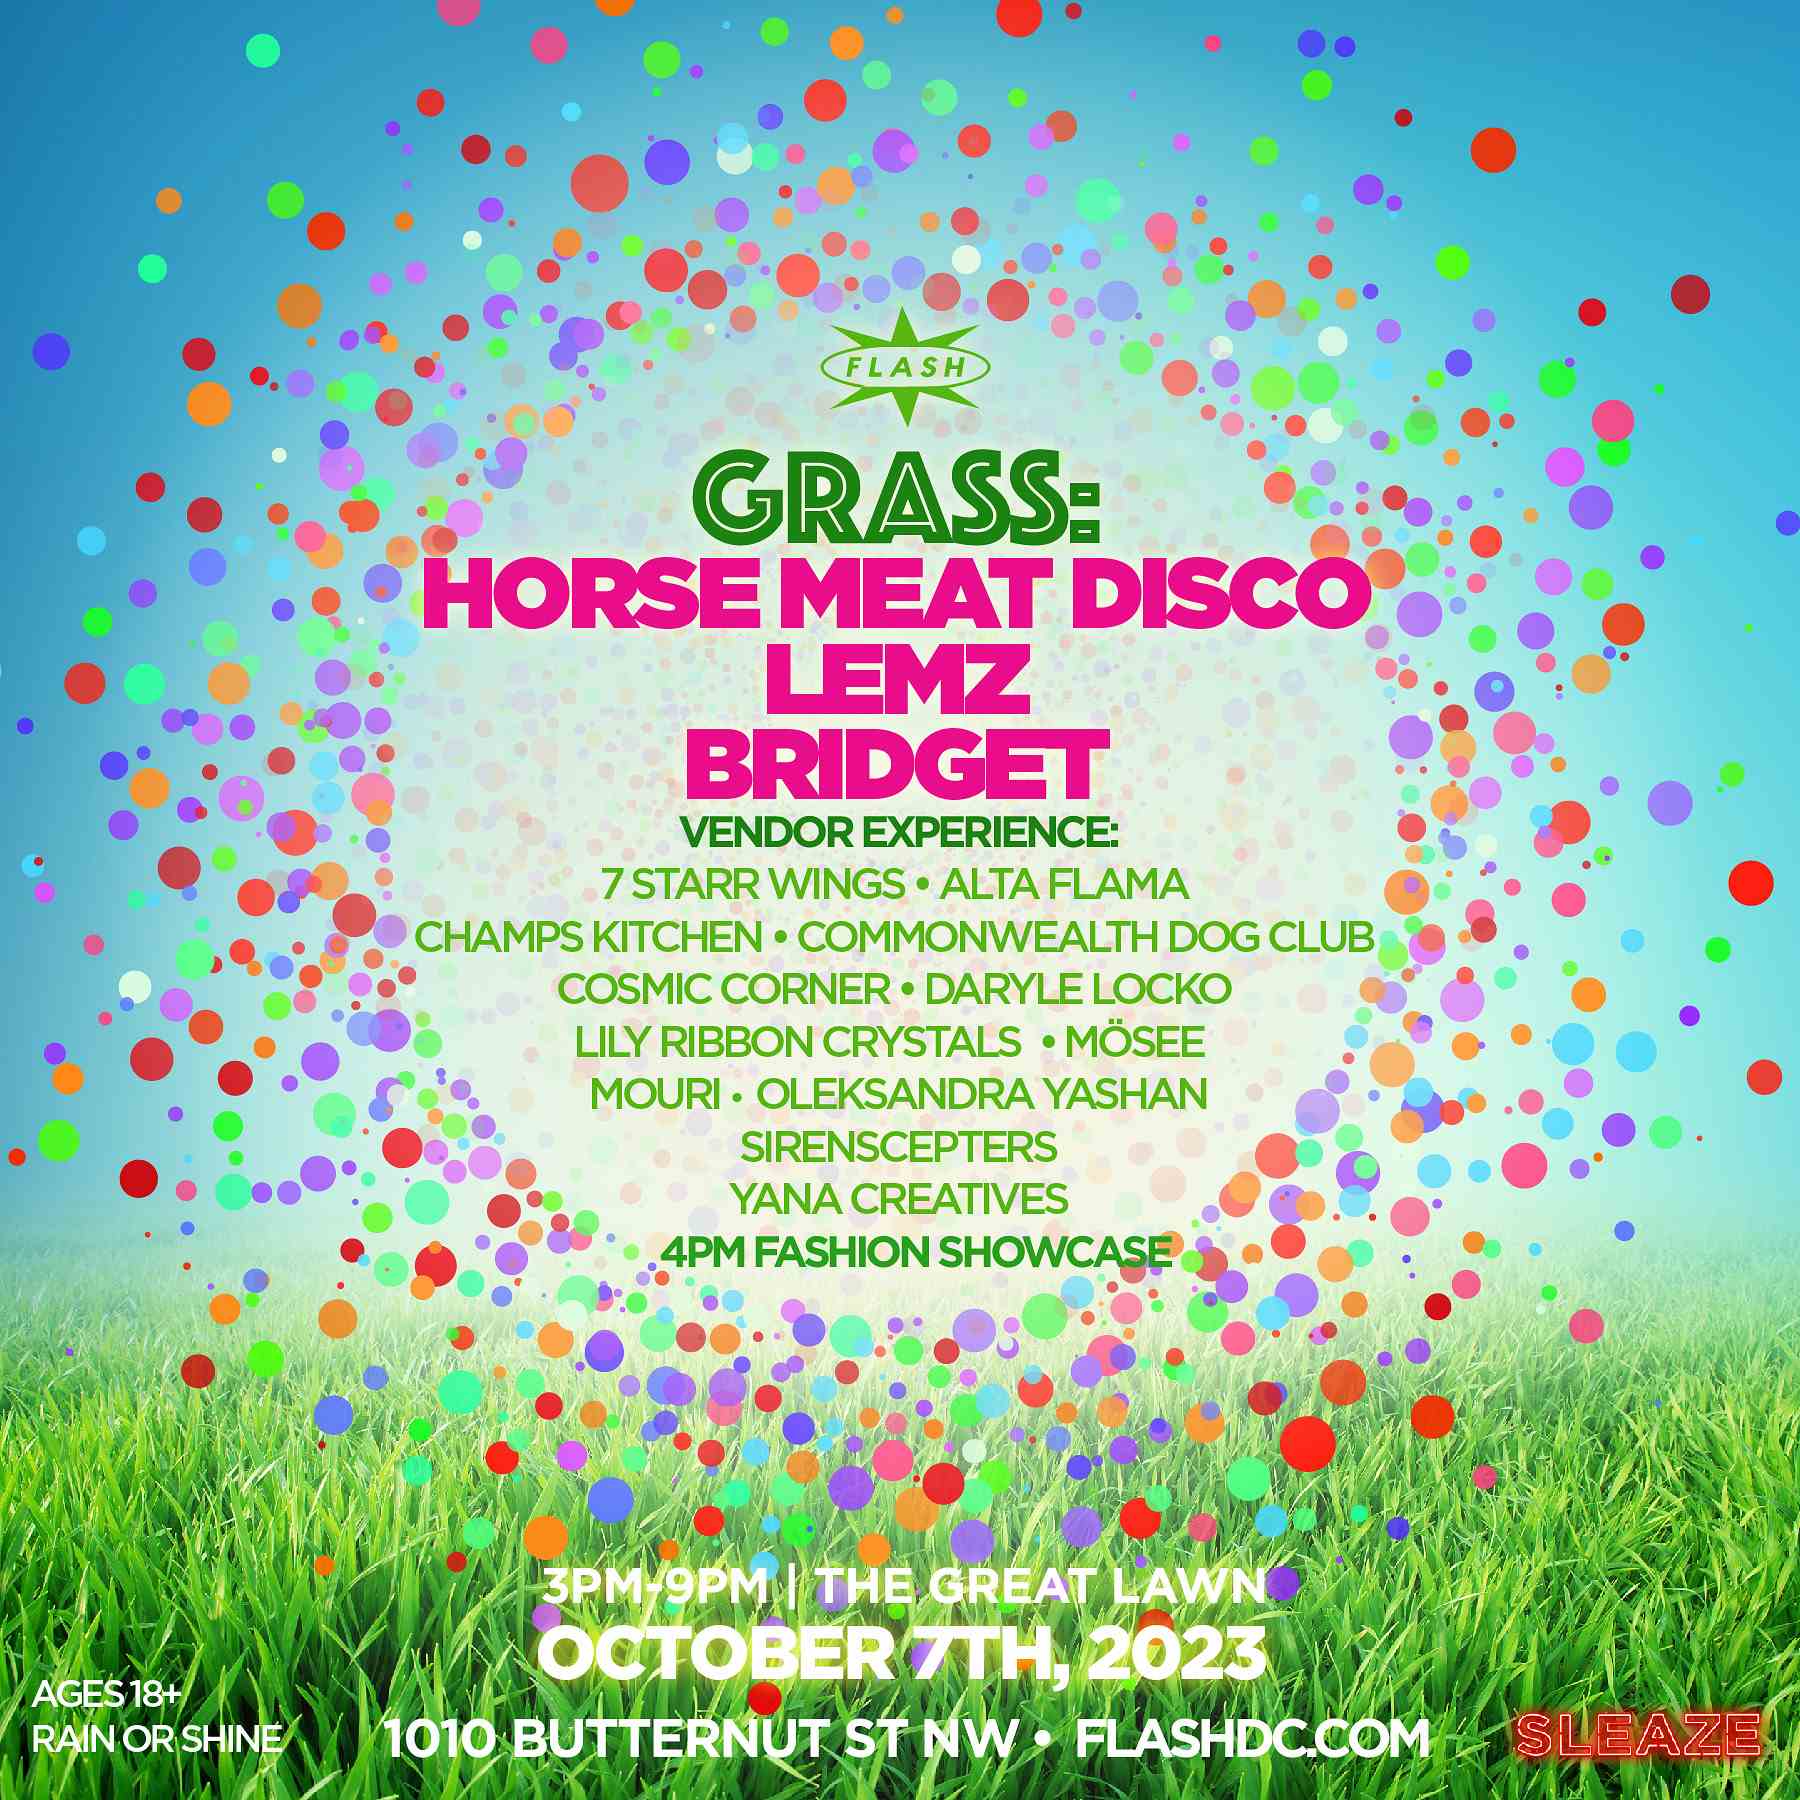 GRASS: Horse Meat Disco event flyer